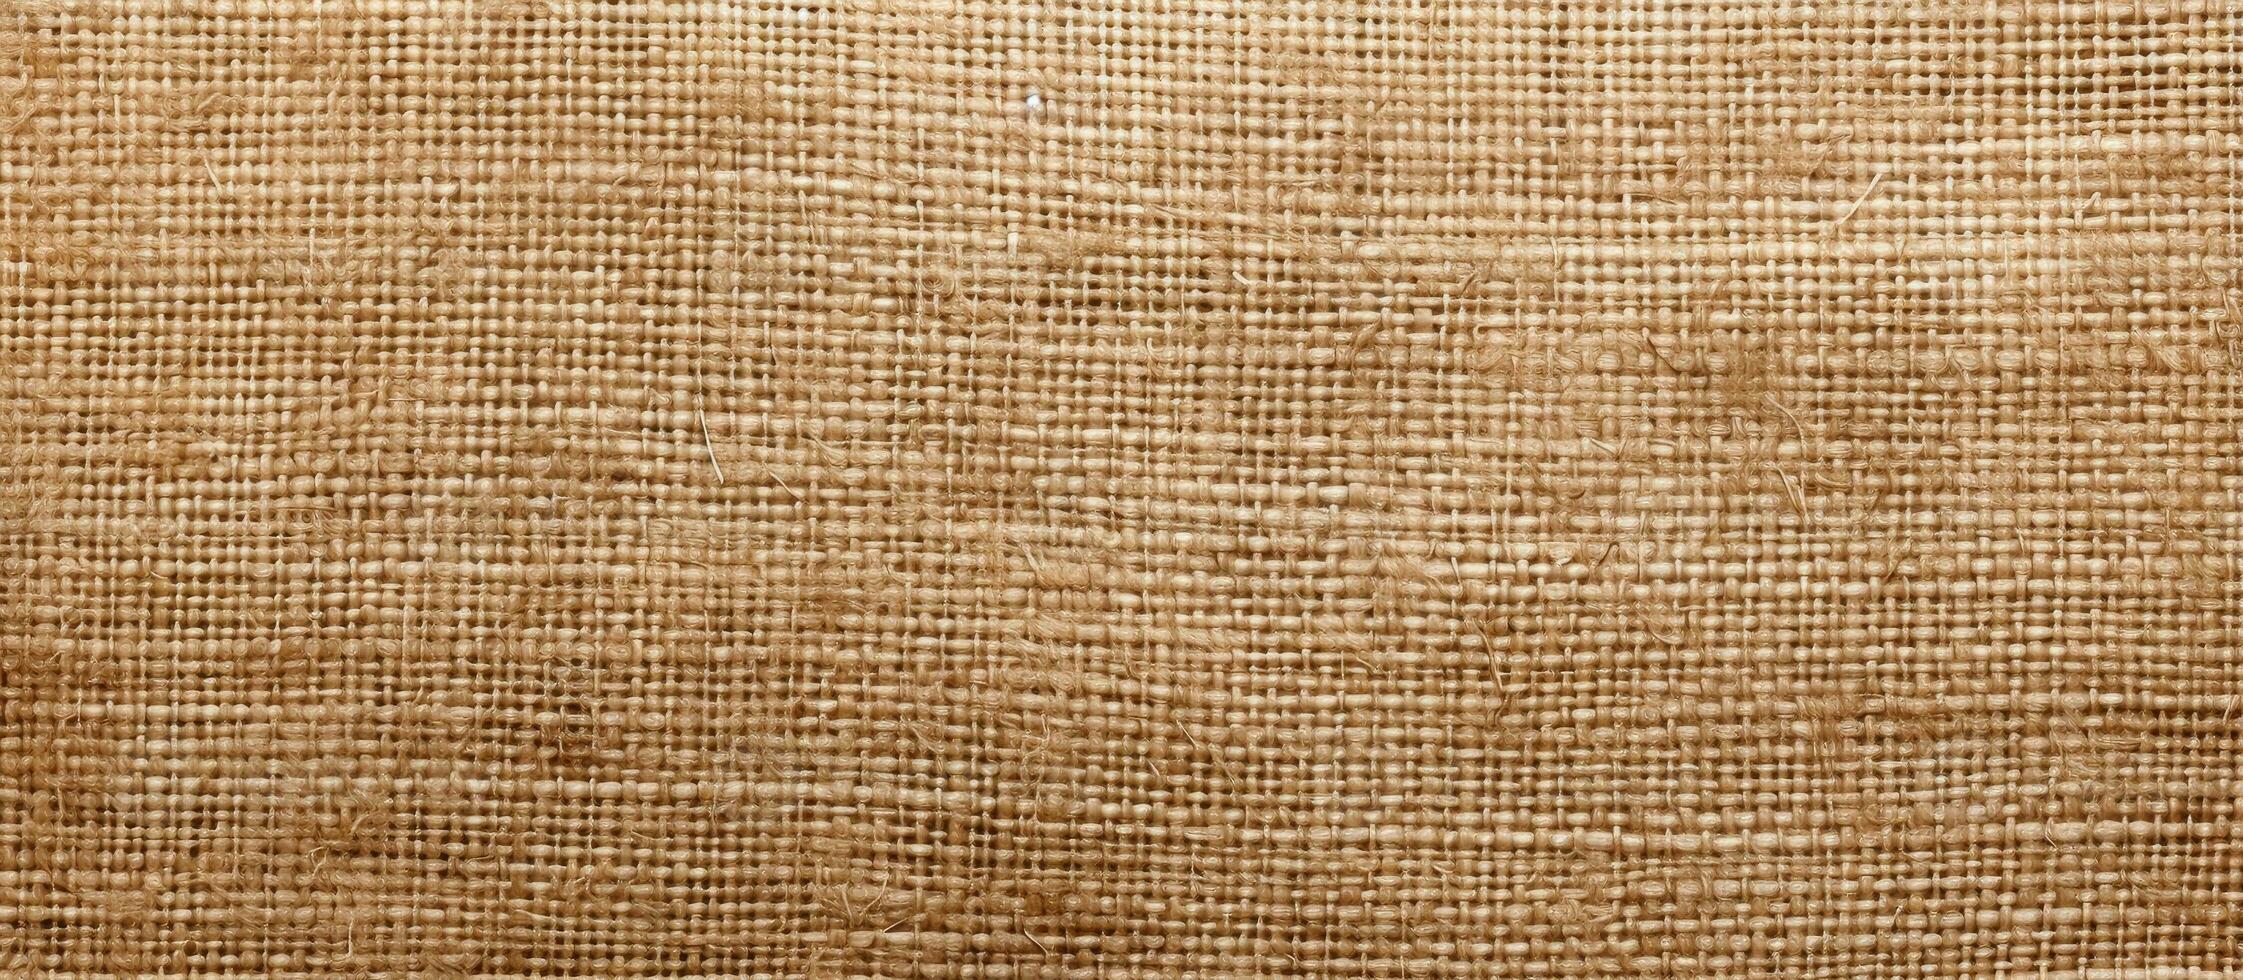 Jute like or canvas like fabric texture in vintage style photo